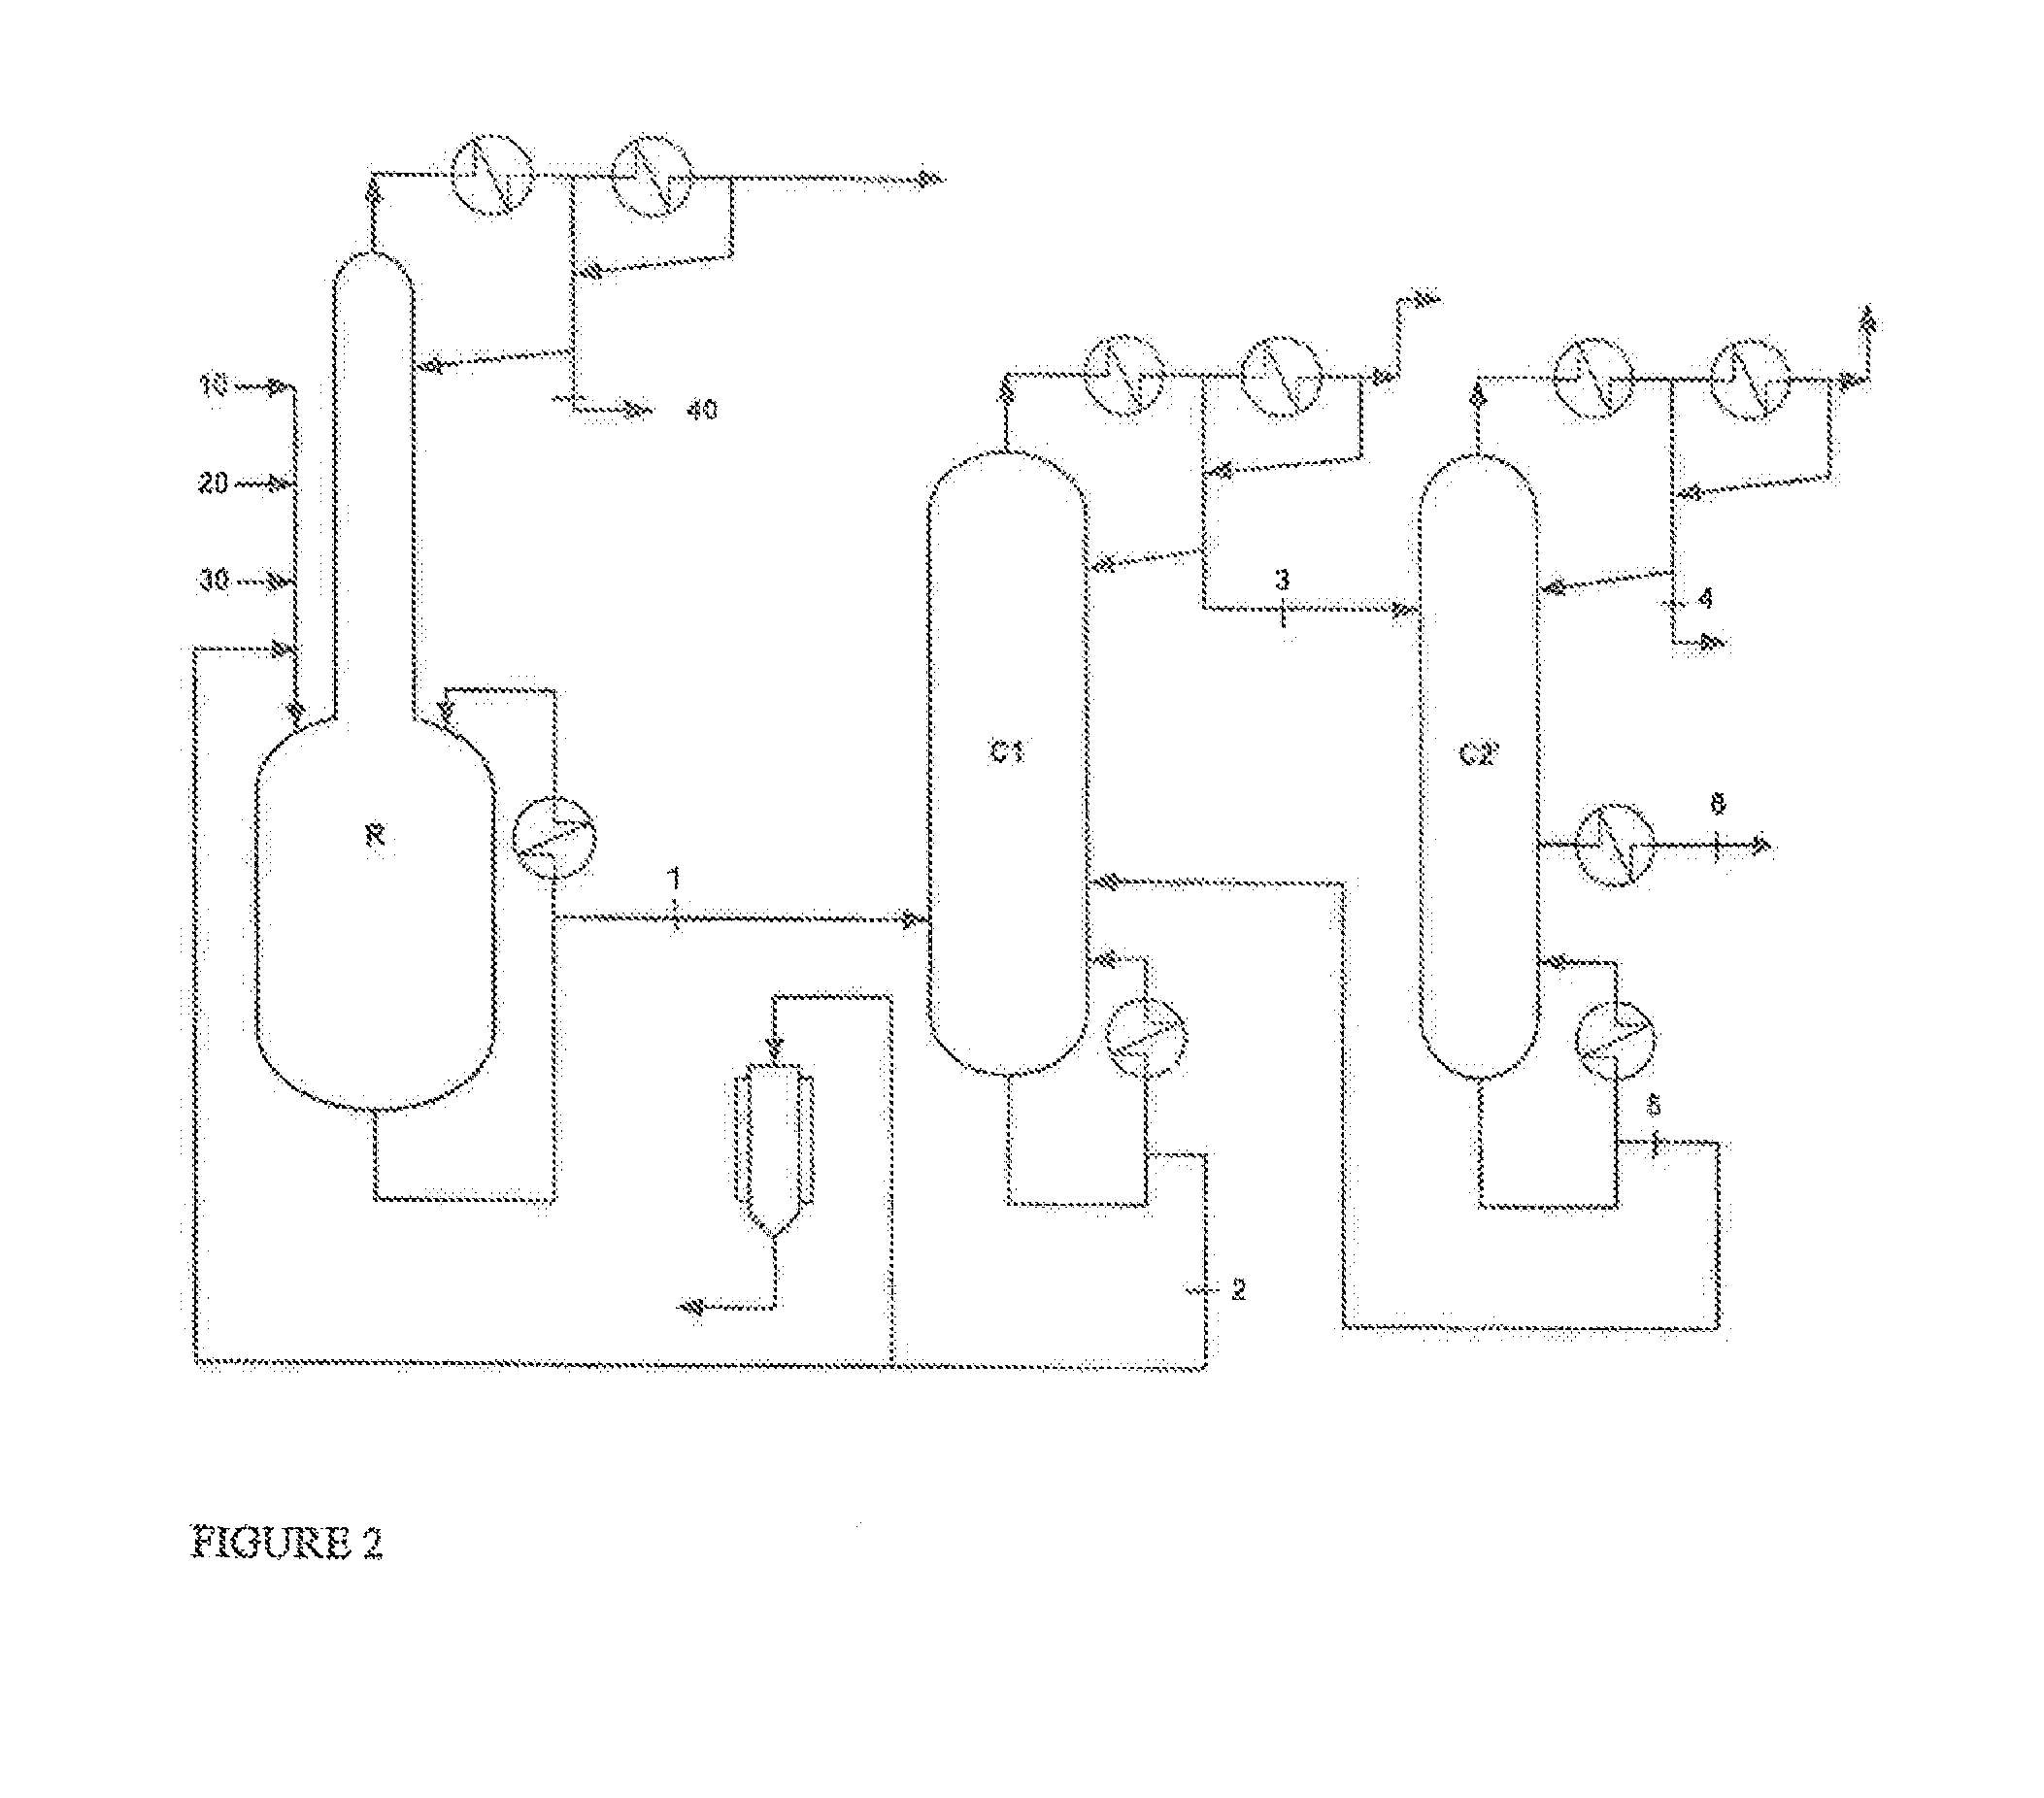 Method for the production of 2-octyl acrylate by means of transesterification